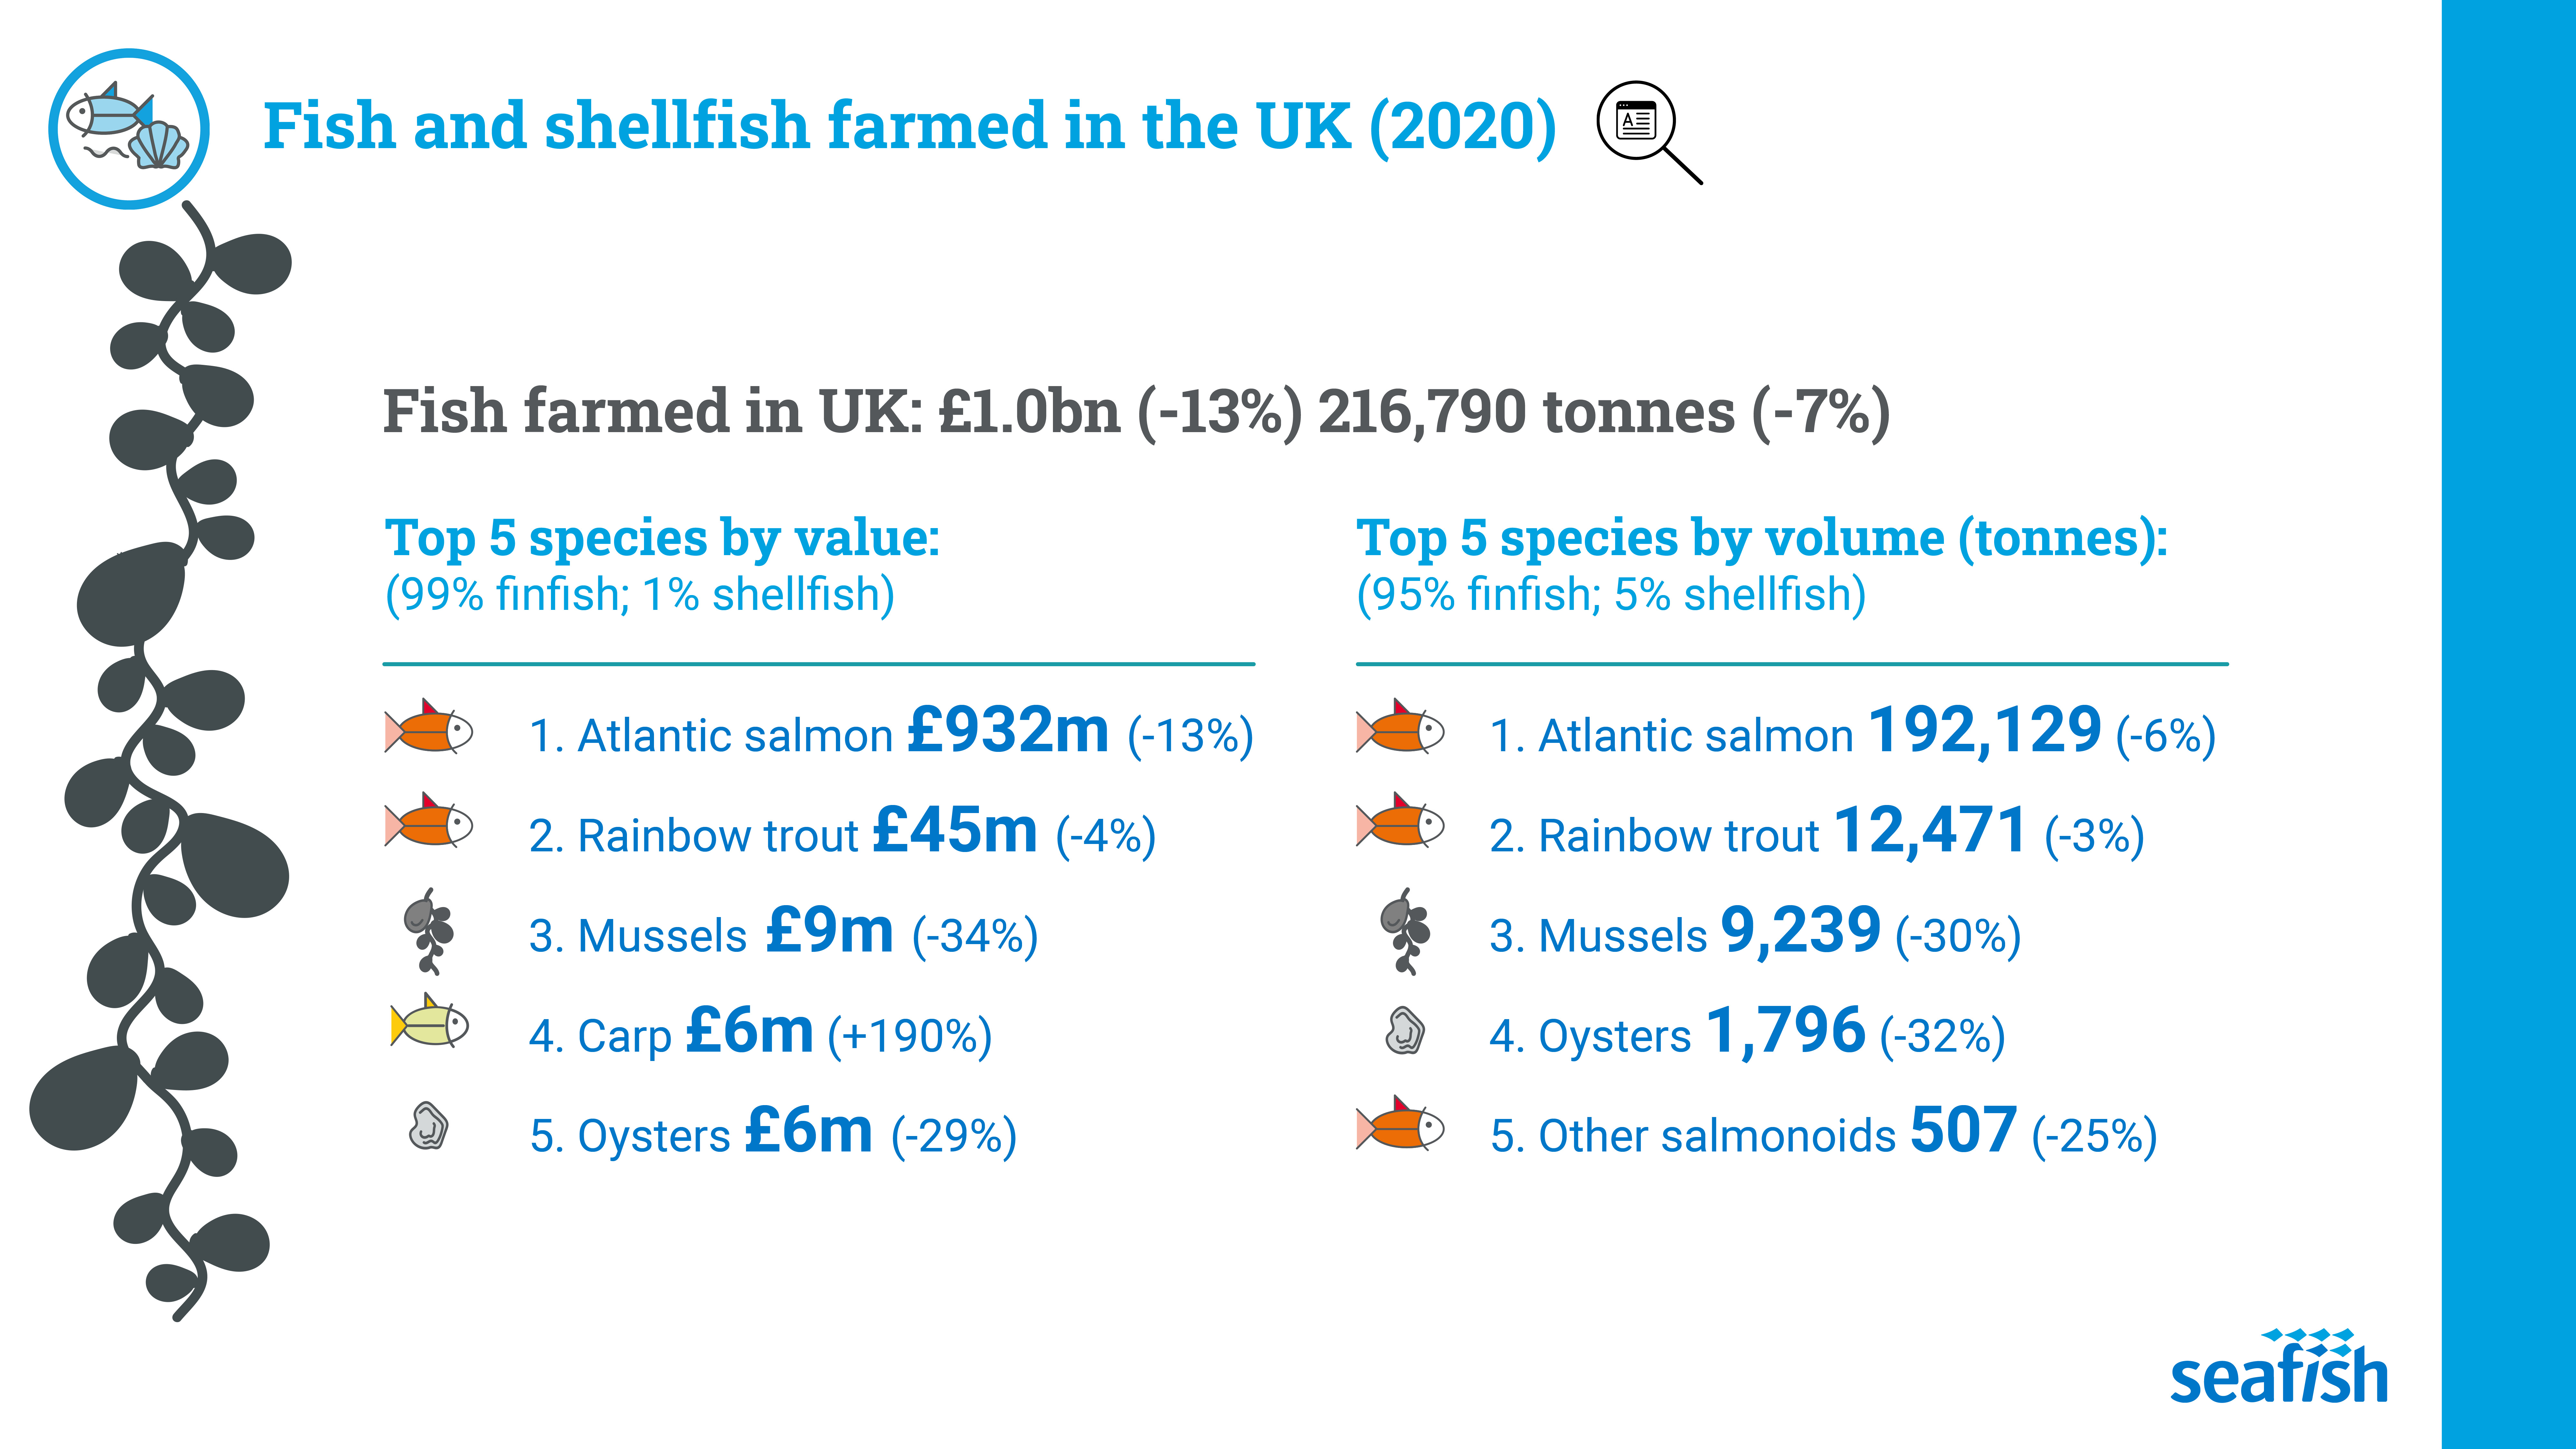 Infographic of fish and shellfish farmed in the UK showing top five species by value and top five species by volume